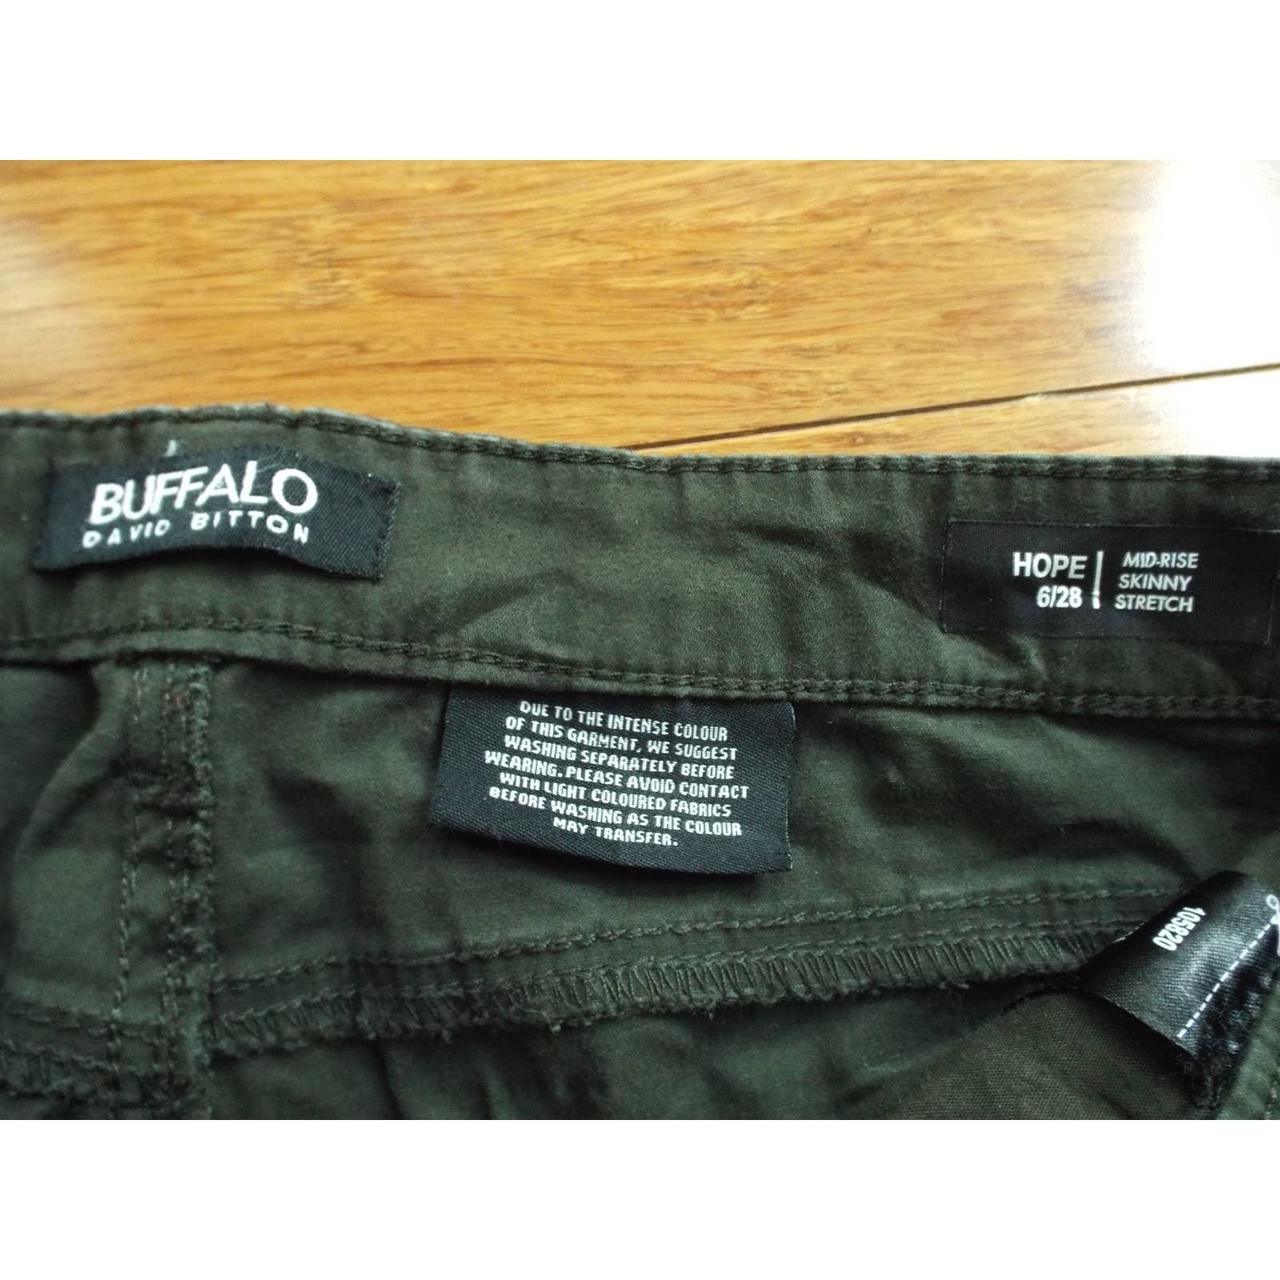 BUFFALO MEN'S SPECIAL 6 Trousers - Olive £115.00 - PicClick UK